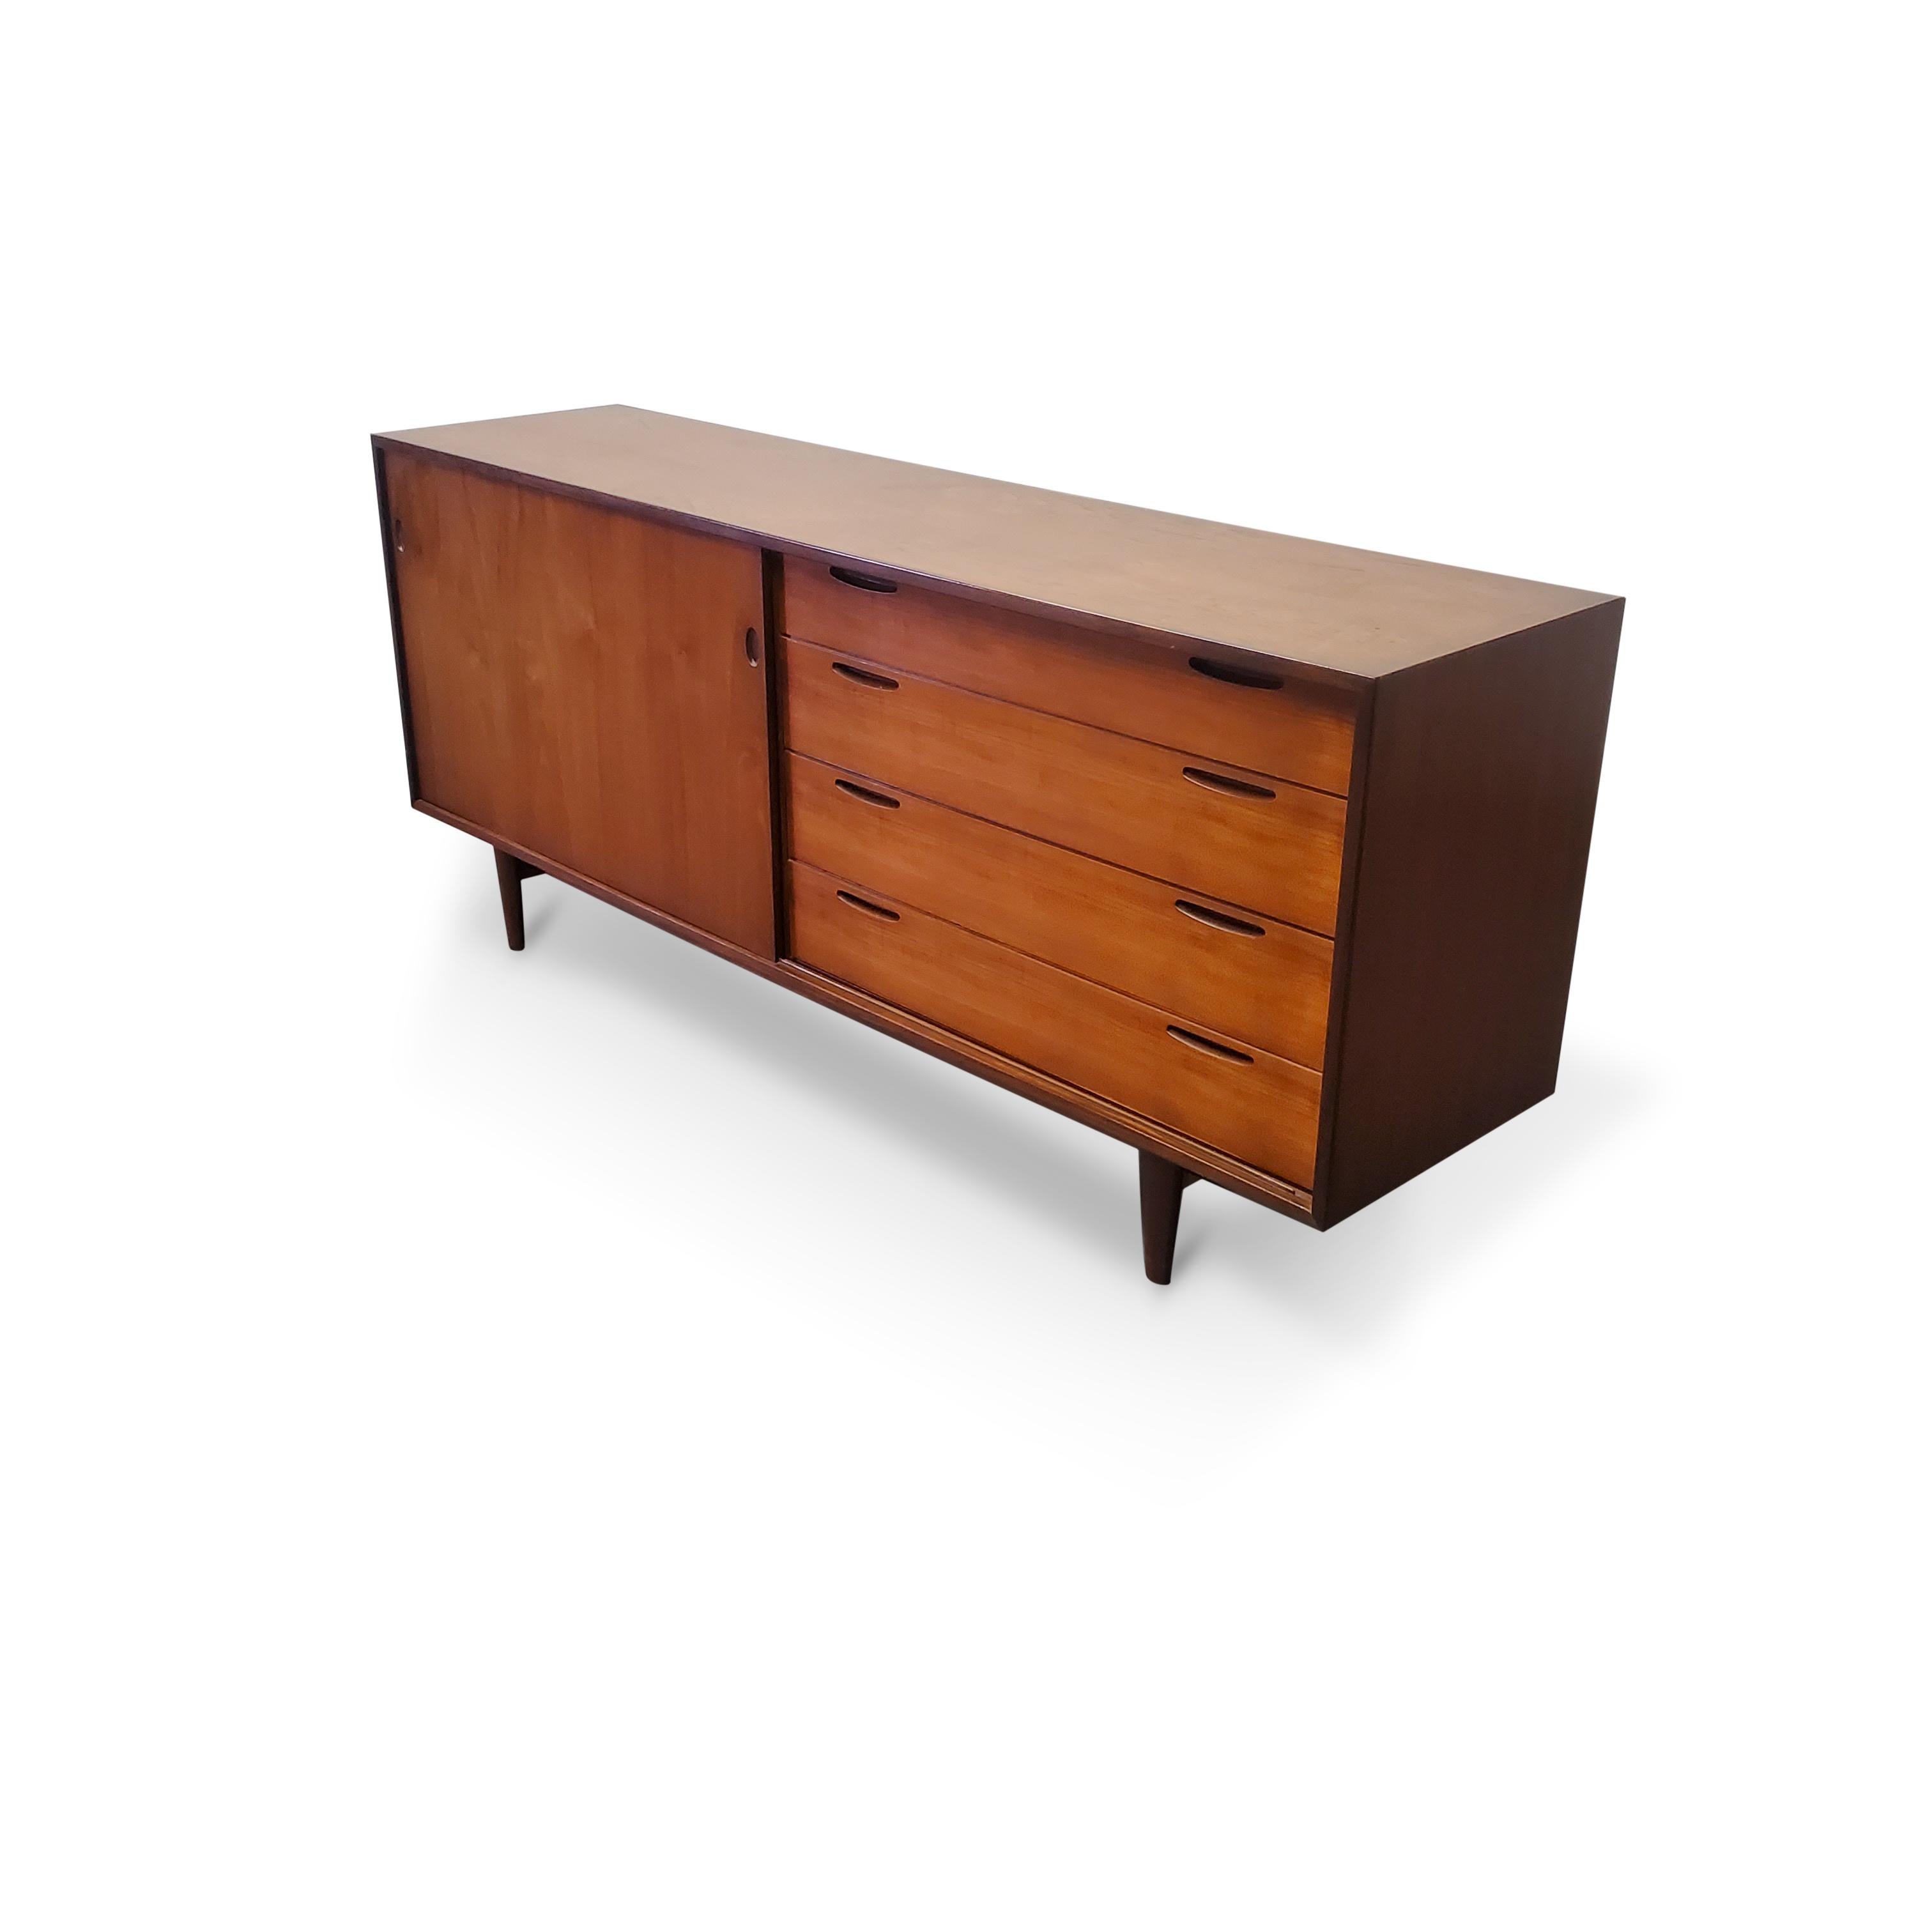 Ib Kofod-Larsen Teak Credenza In Good Condition For Sale In Middlesex, NJ